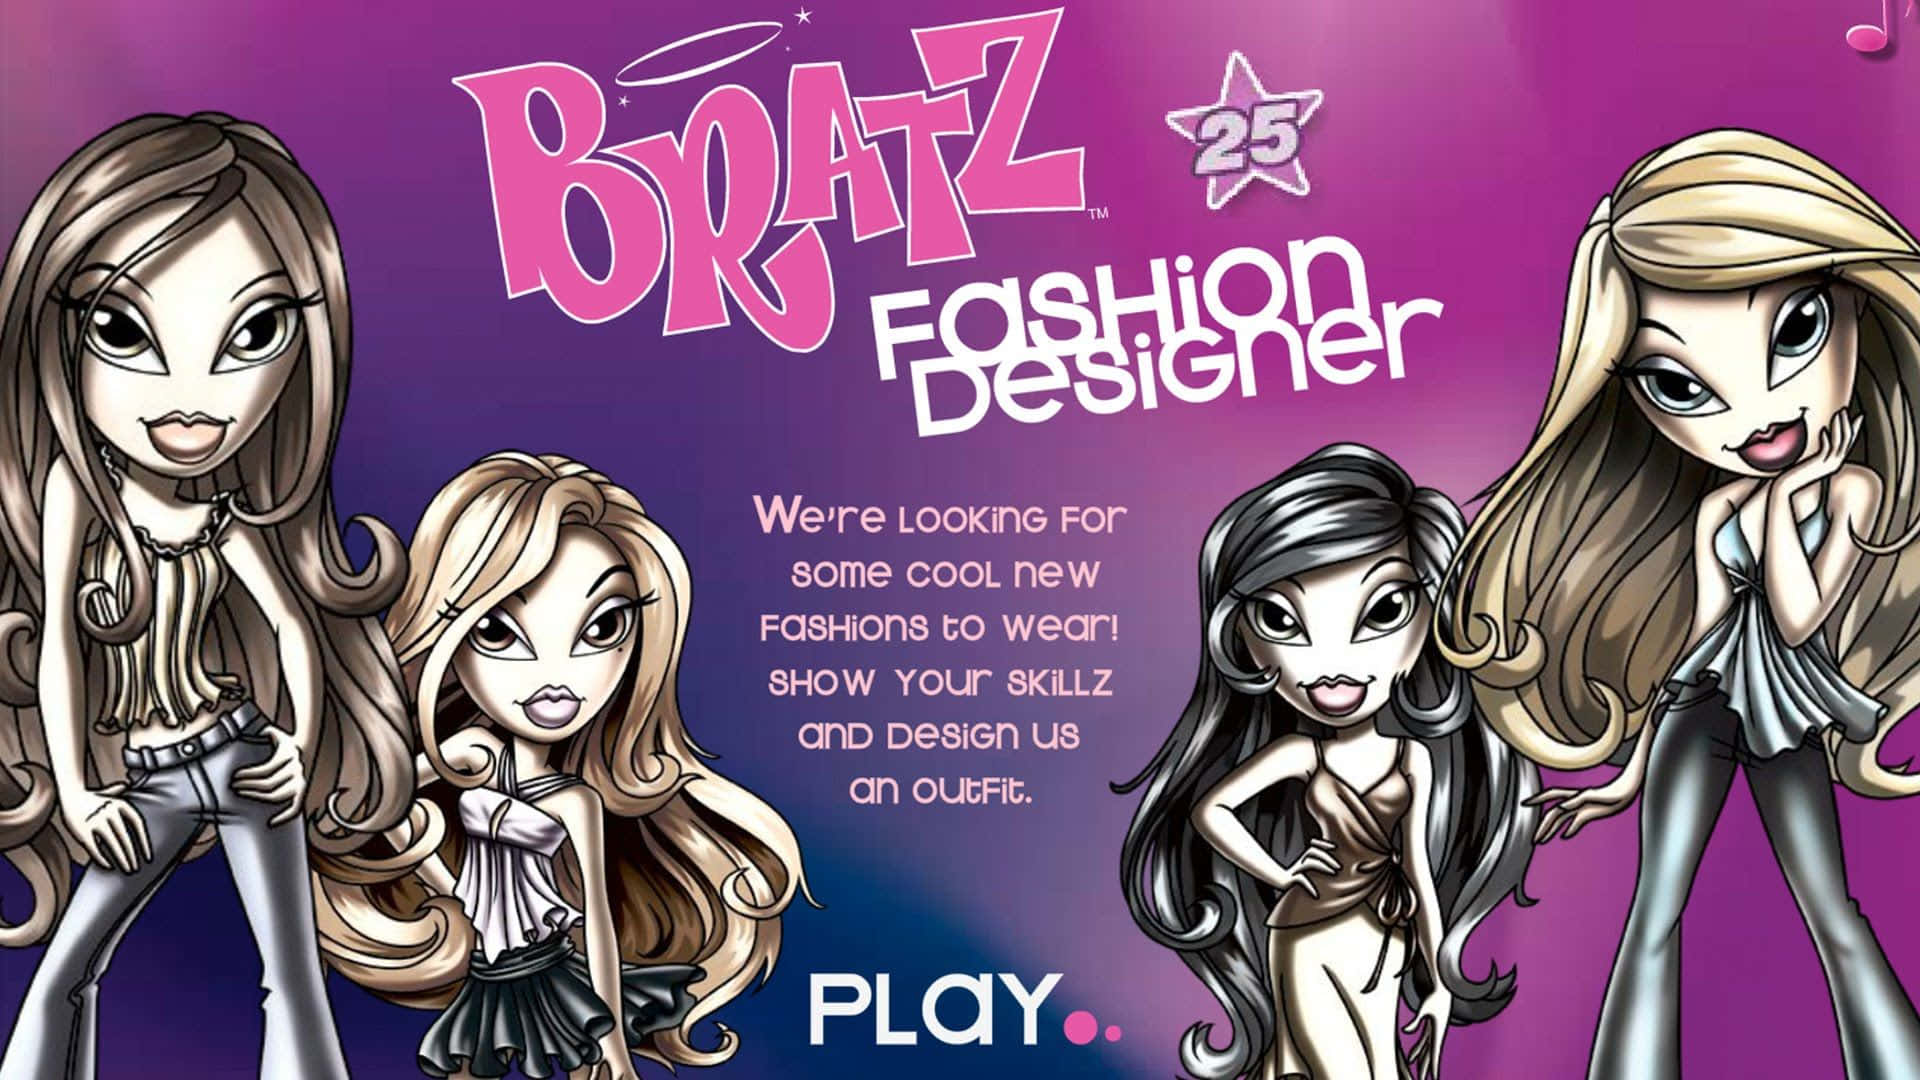 Bratz Dolls striking a pose in chic outfits